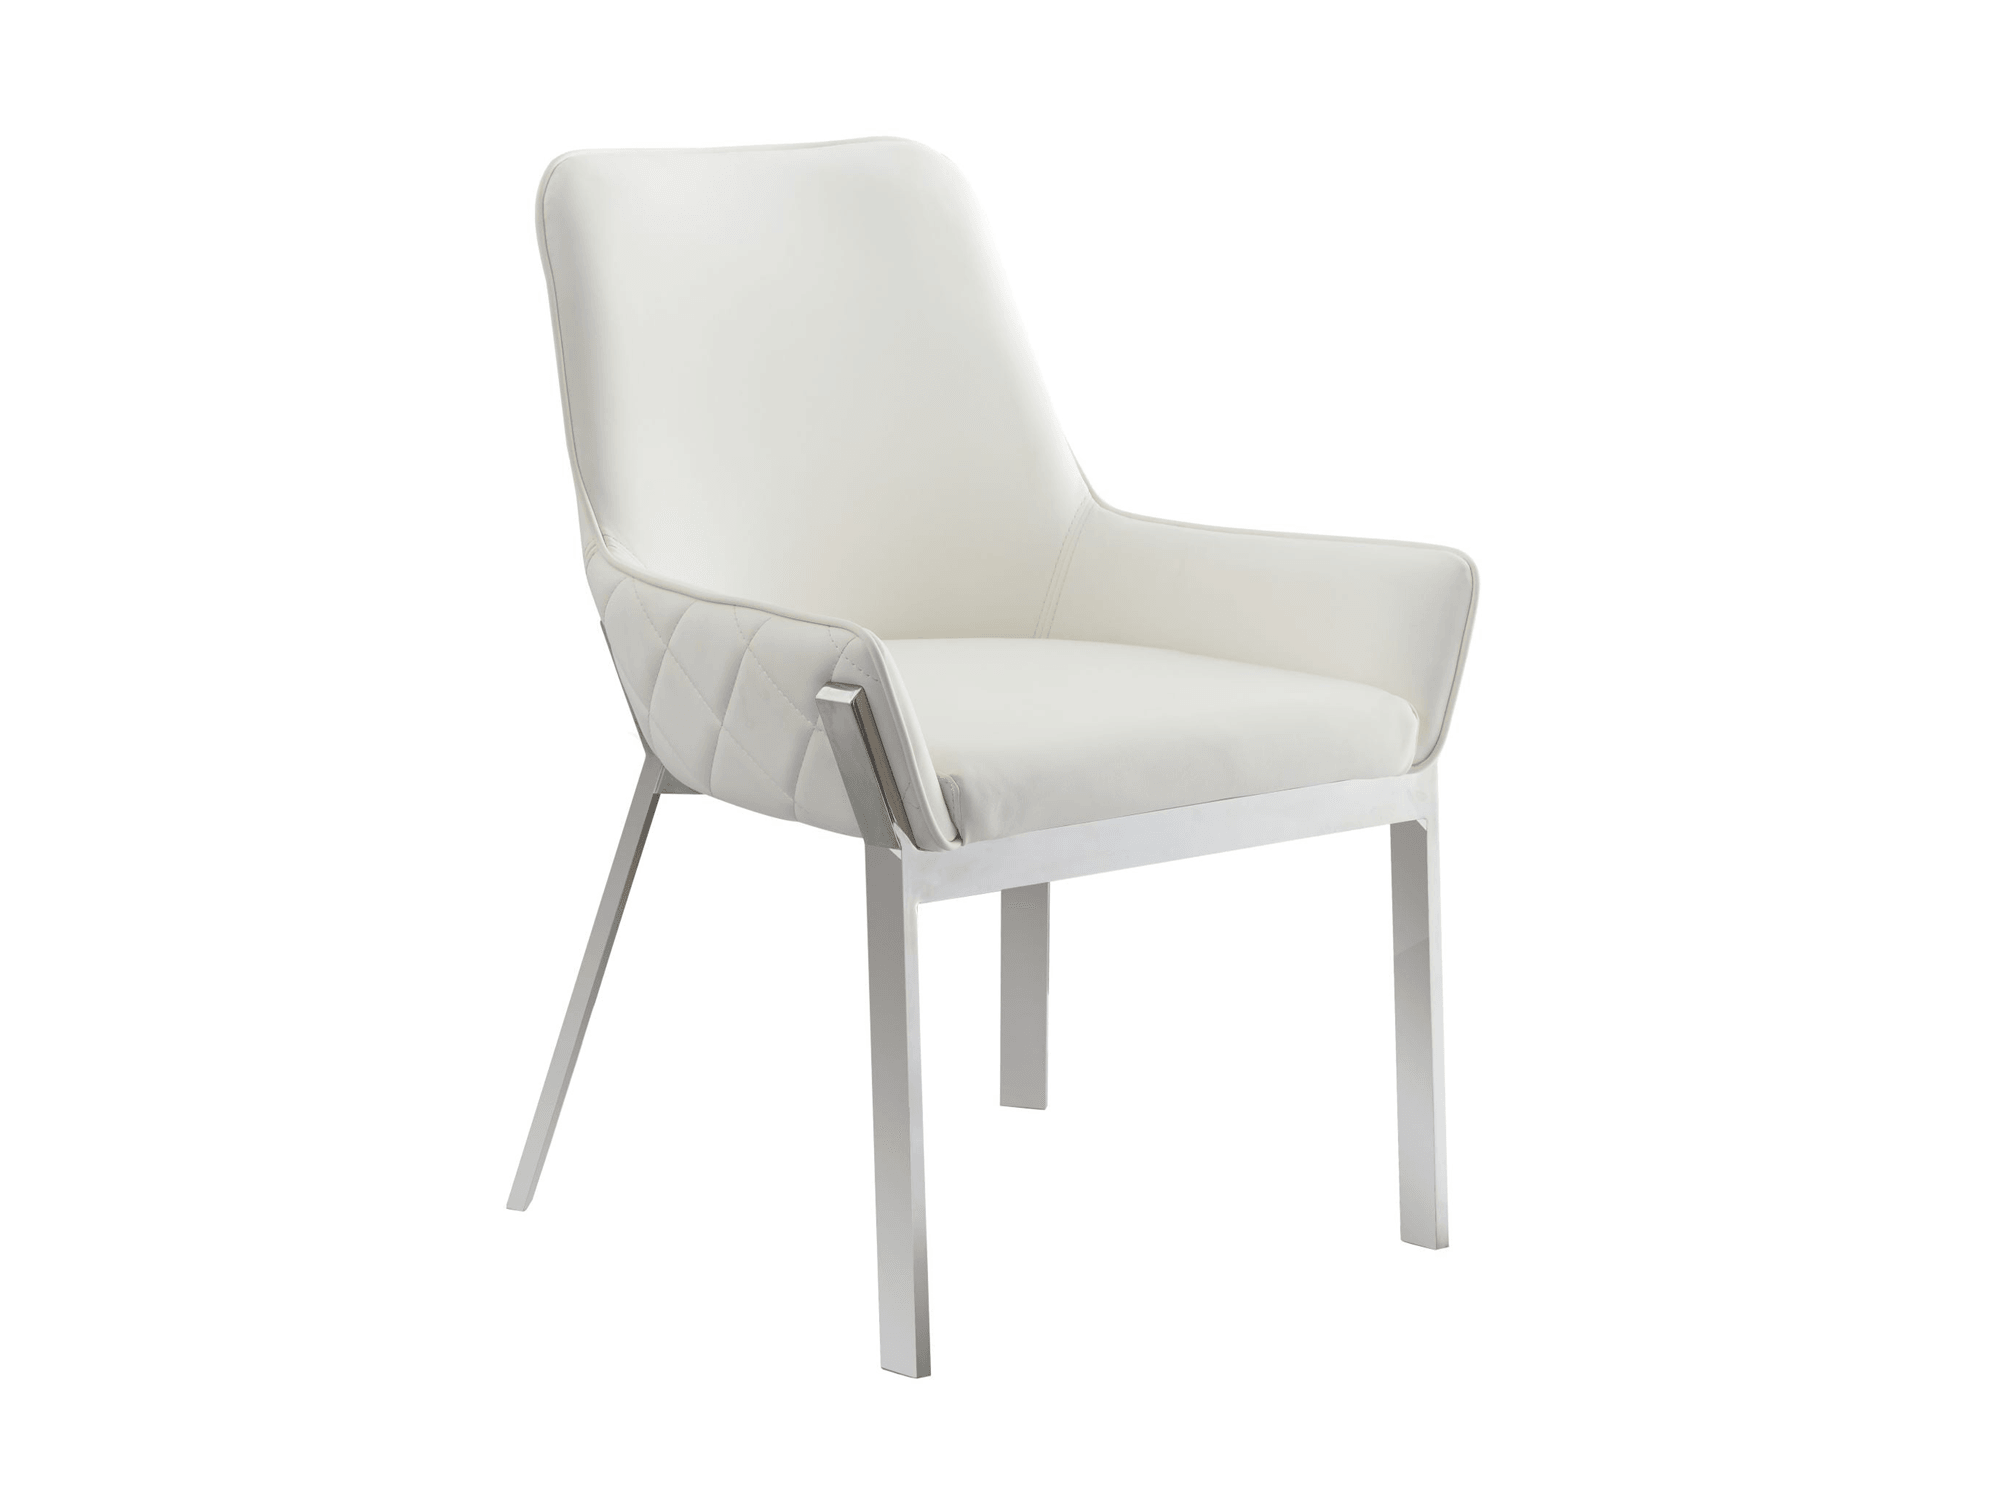 Premier Dining Chair in White - Euro Living Furniture